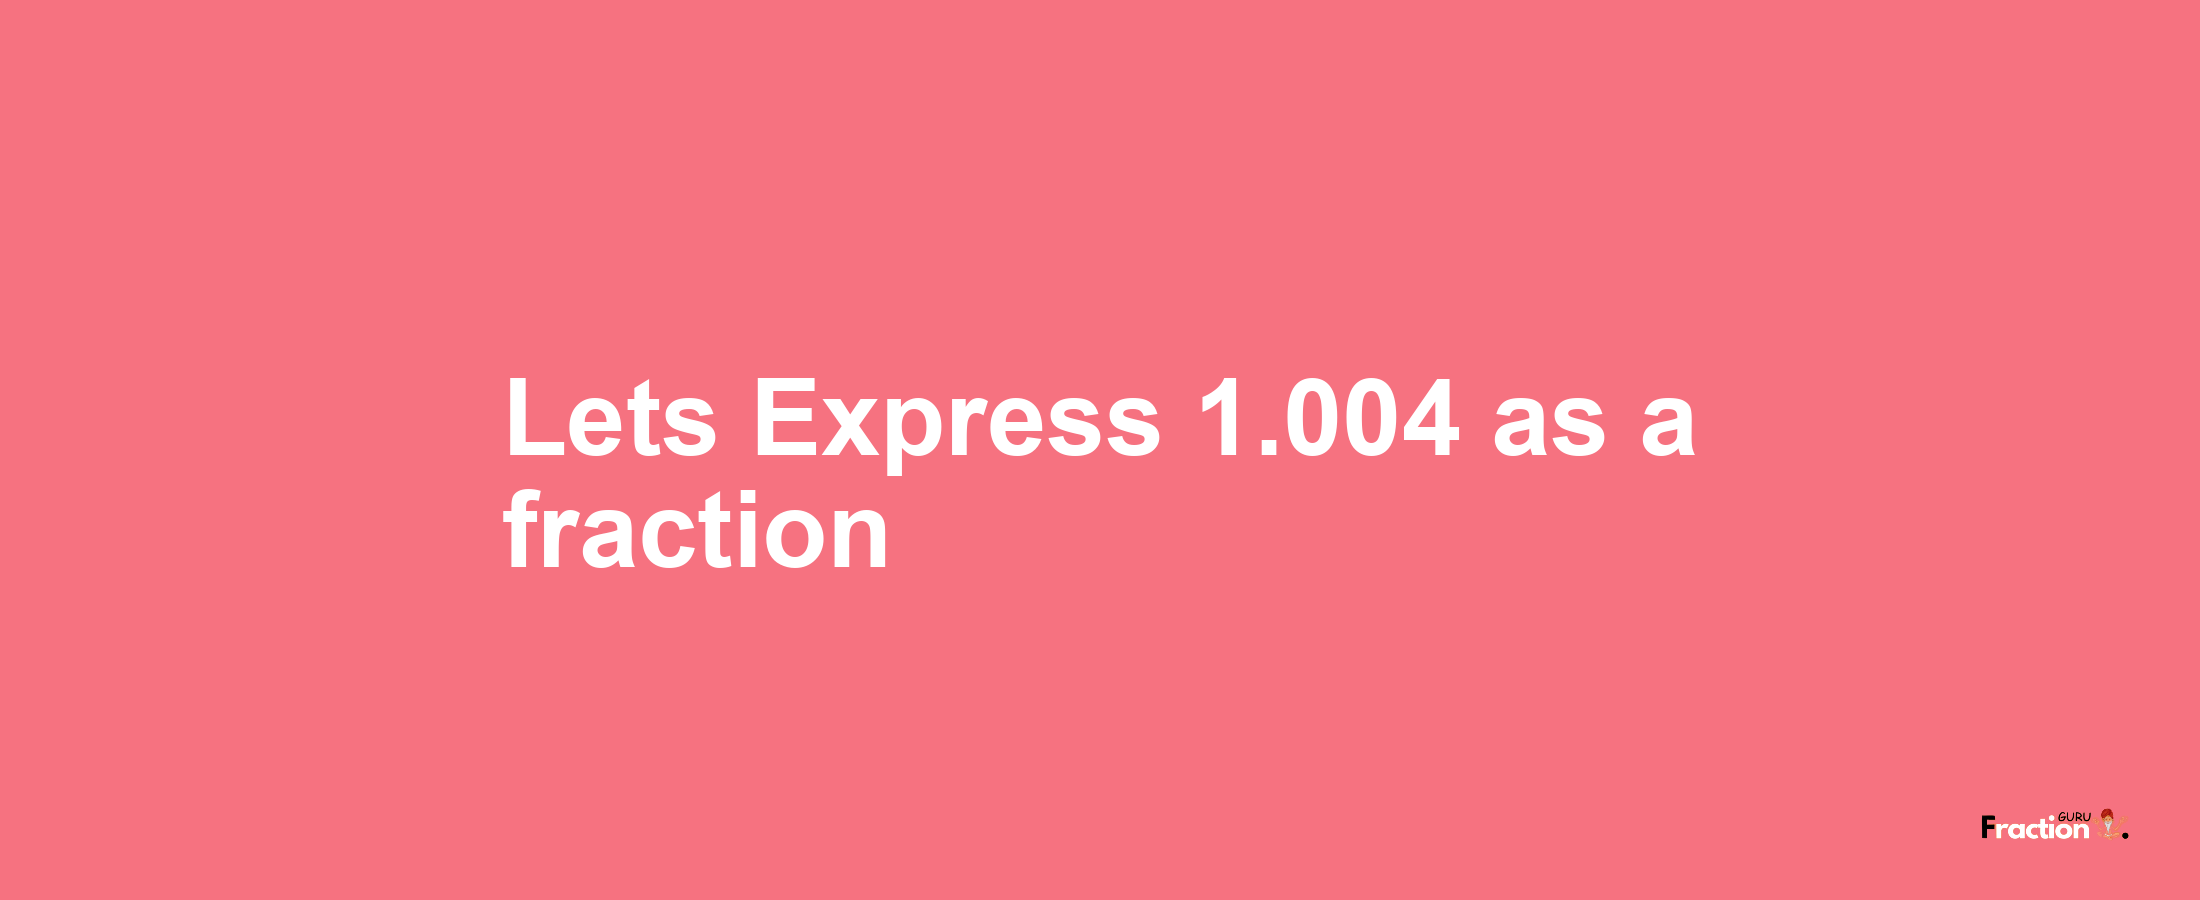 Lets Express 1.004 as afraction